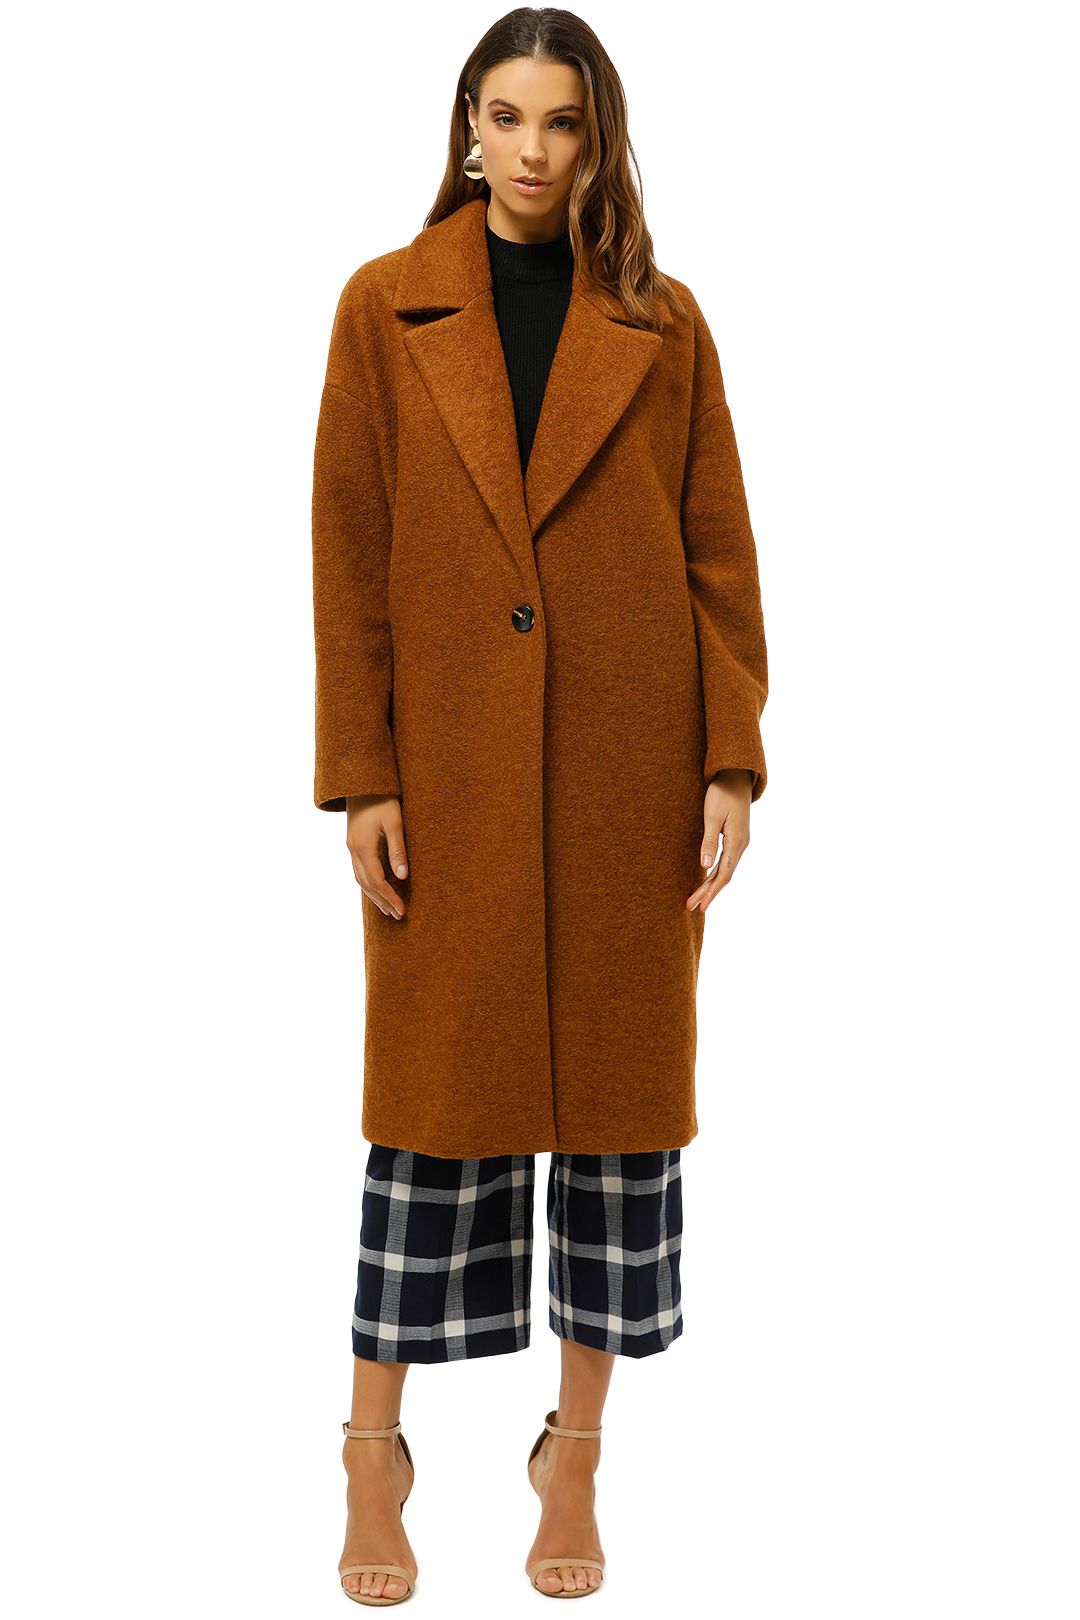 MNG-Unstructured-Virgin-Wool-Coat-Caramel-Front-Closed